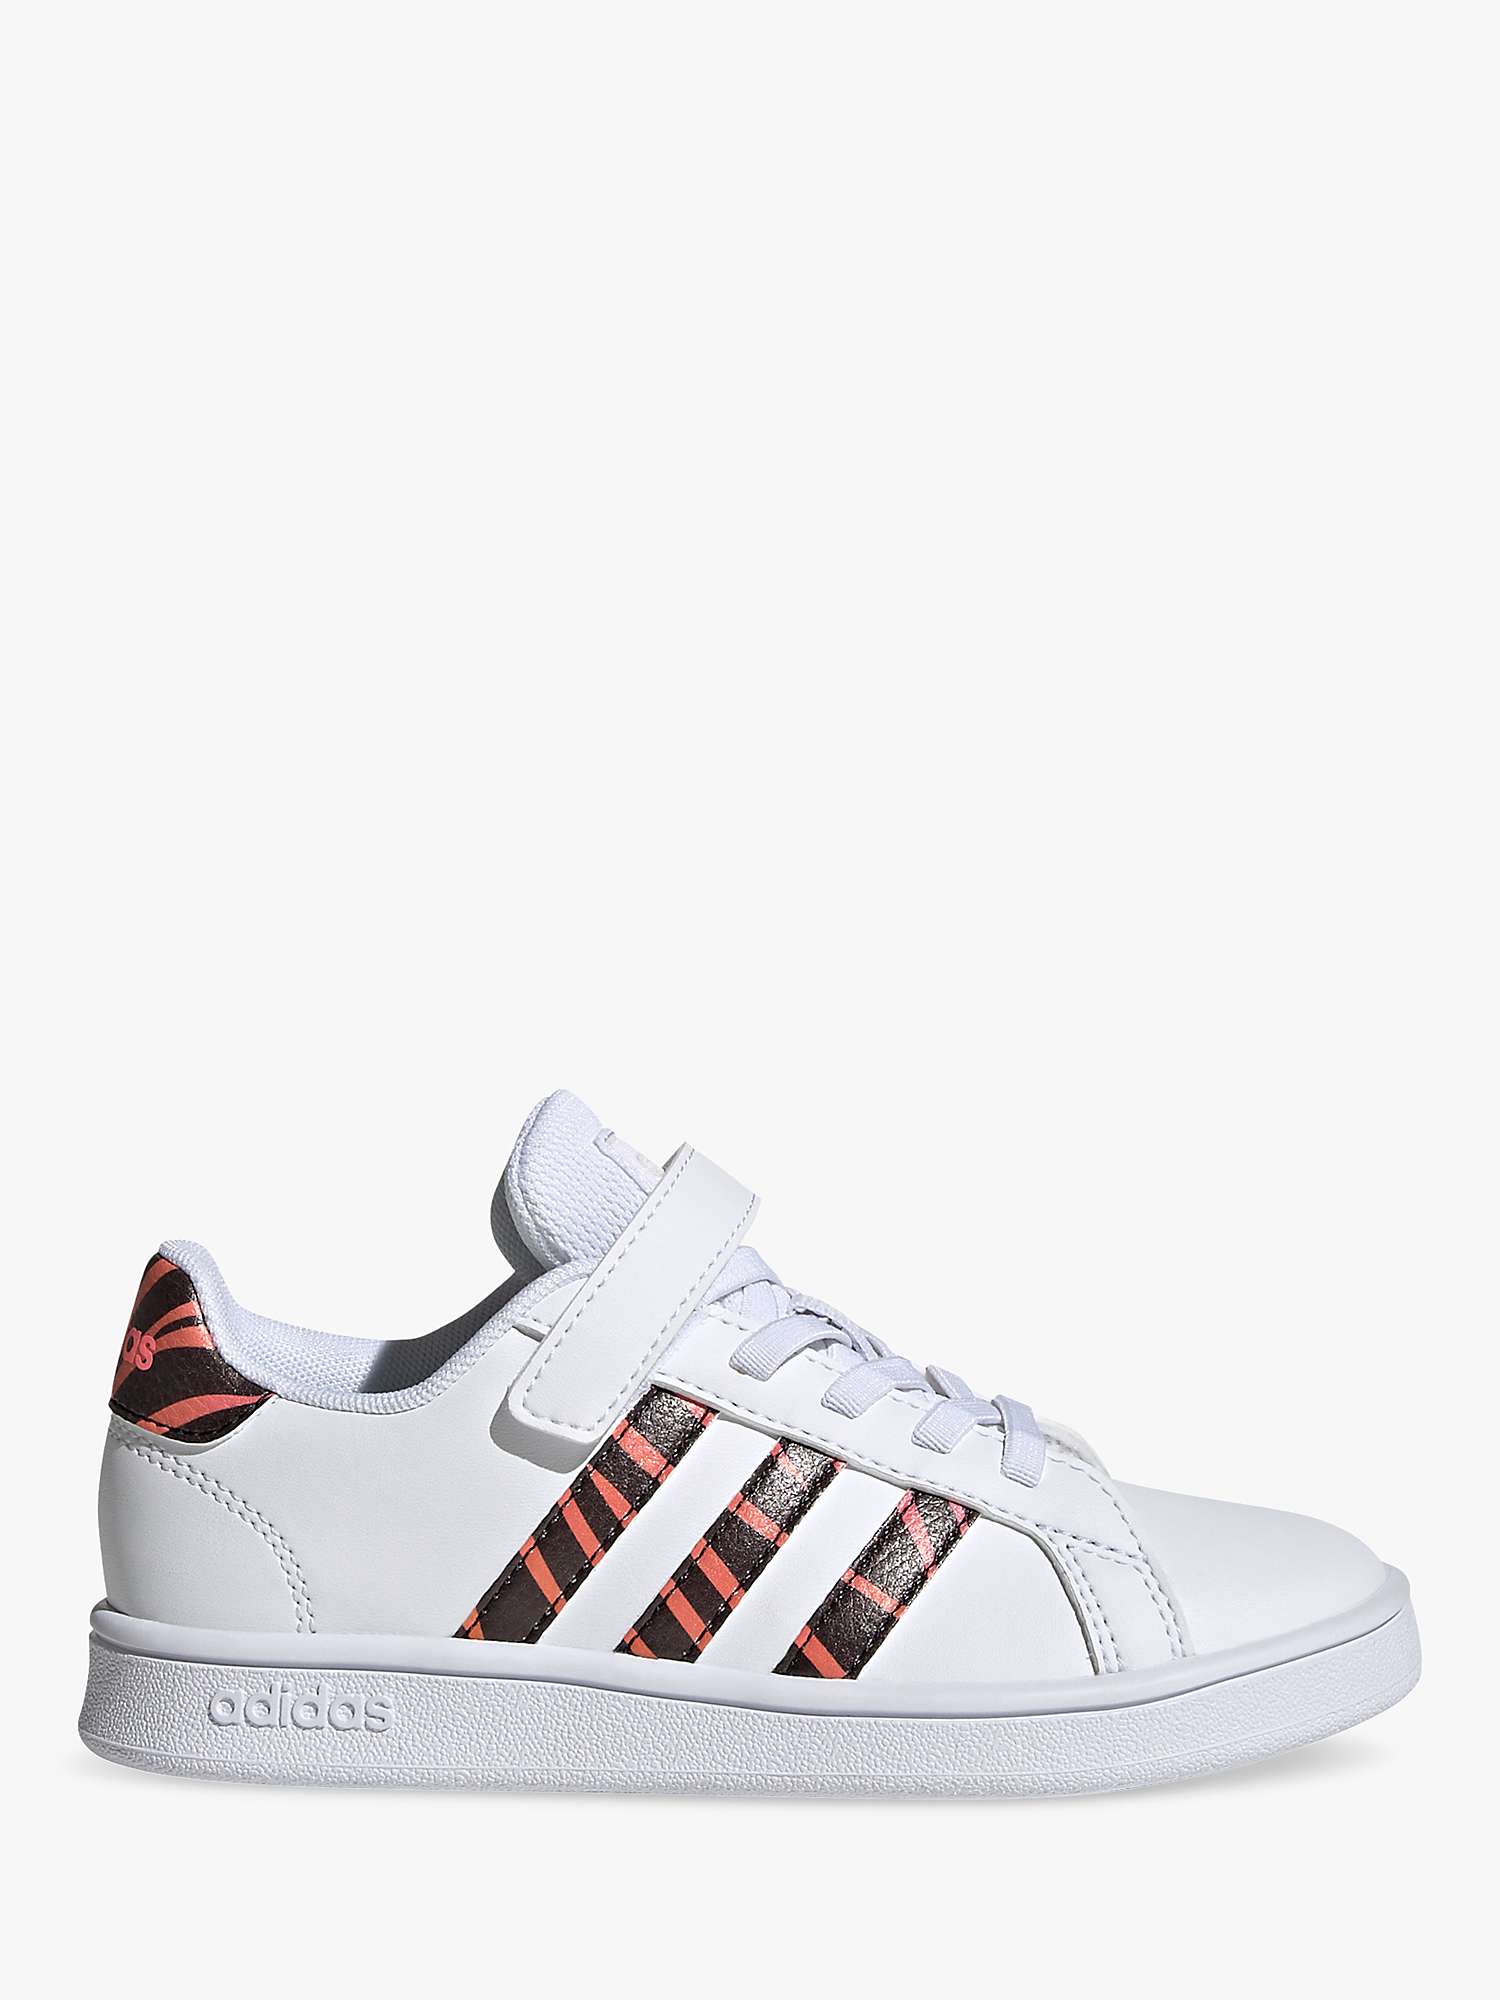 Buy adidas Children's Grand Court Riptape Trainers Online at johnlewis.com